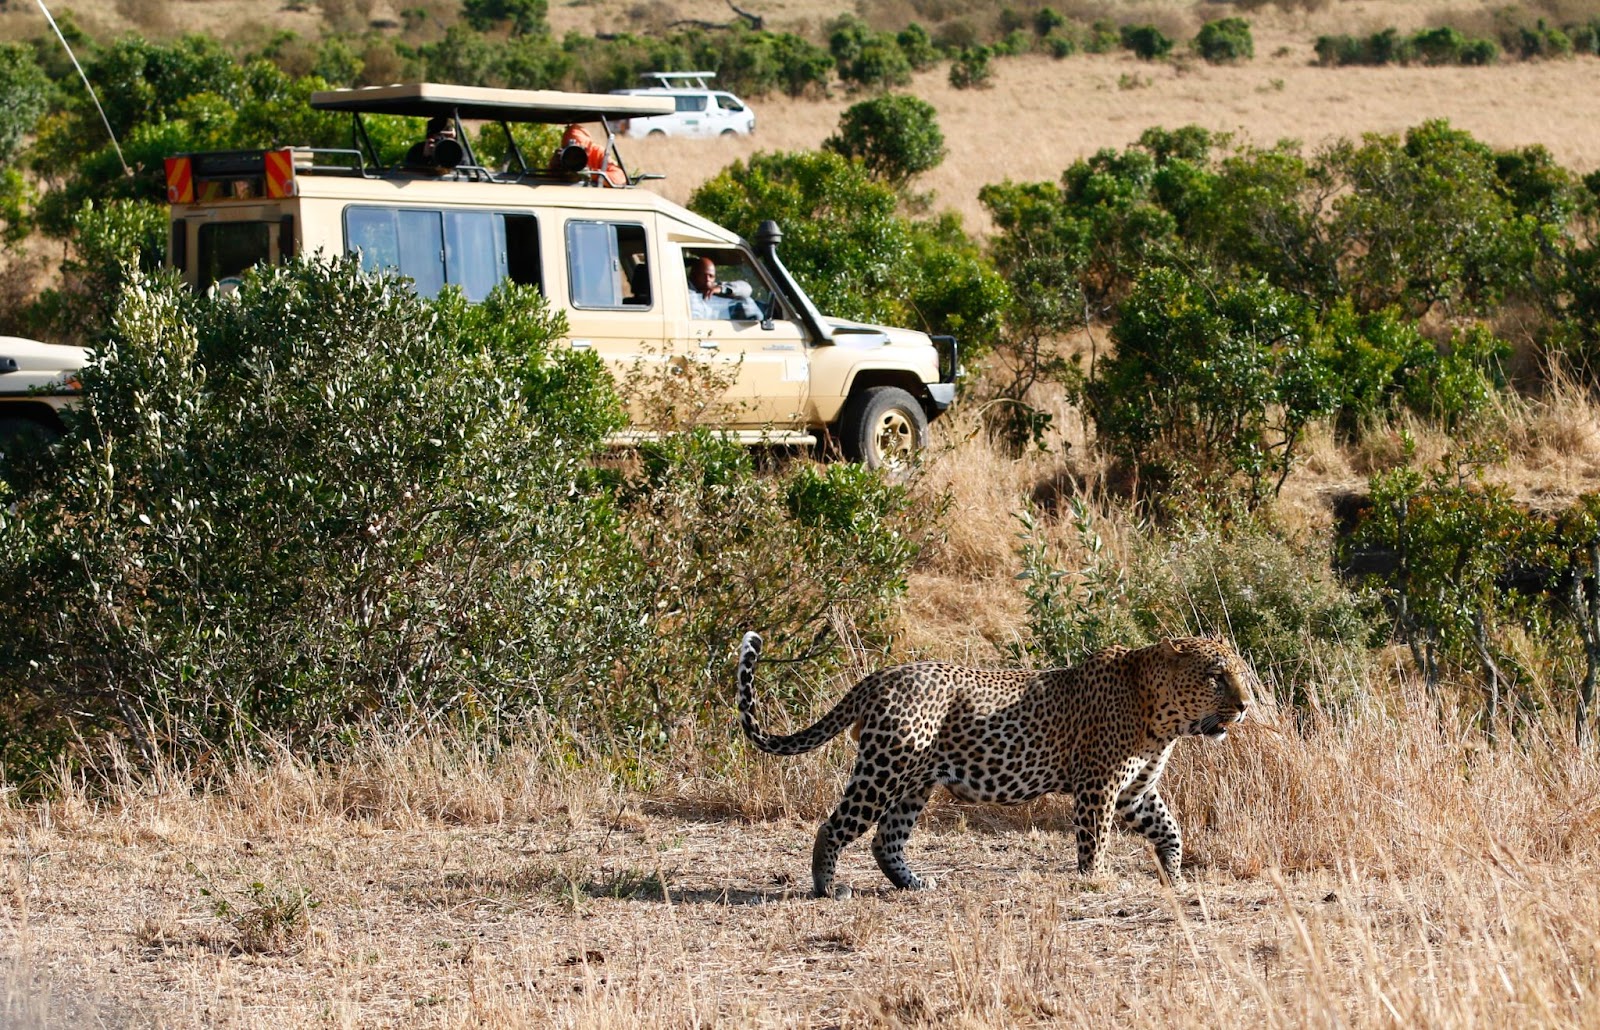 Traveling to Kenya from the USA for a Safari: How to Plan the Best Kenya Safari Trip